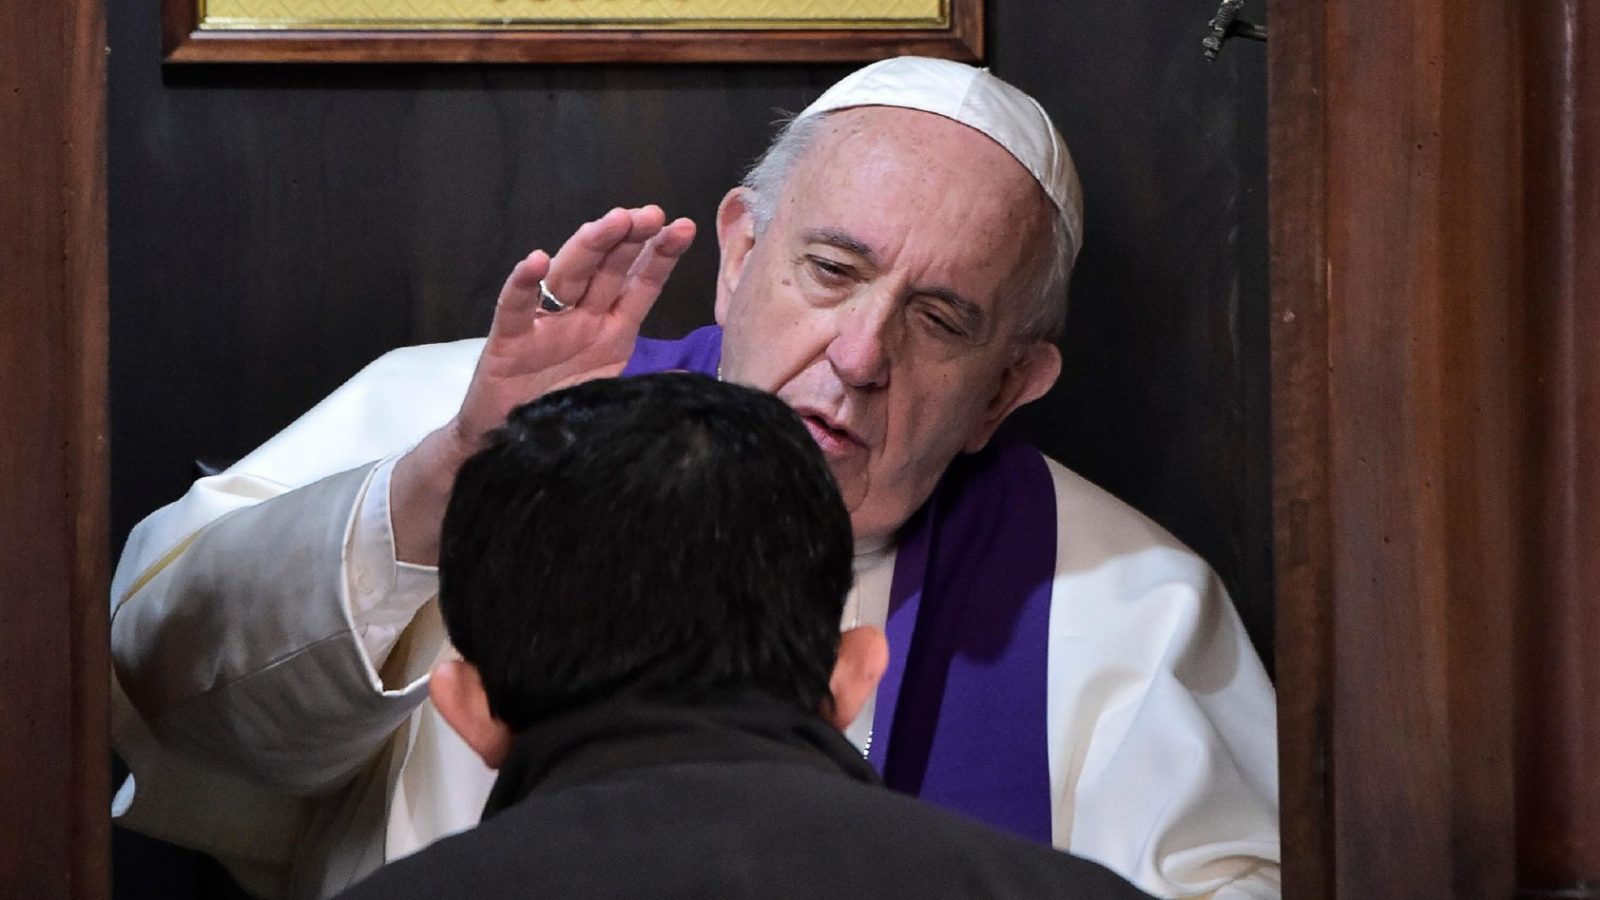 Pope Francis 'Experience Lent with love' by caring for those affected